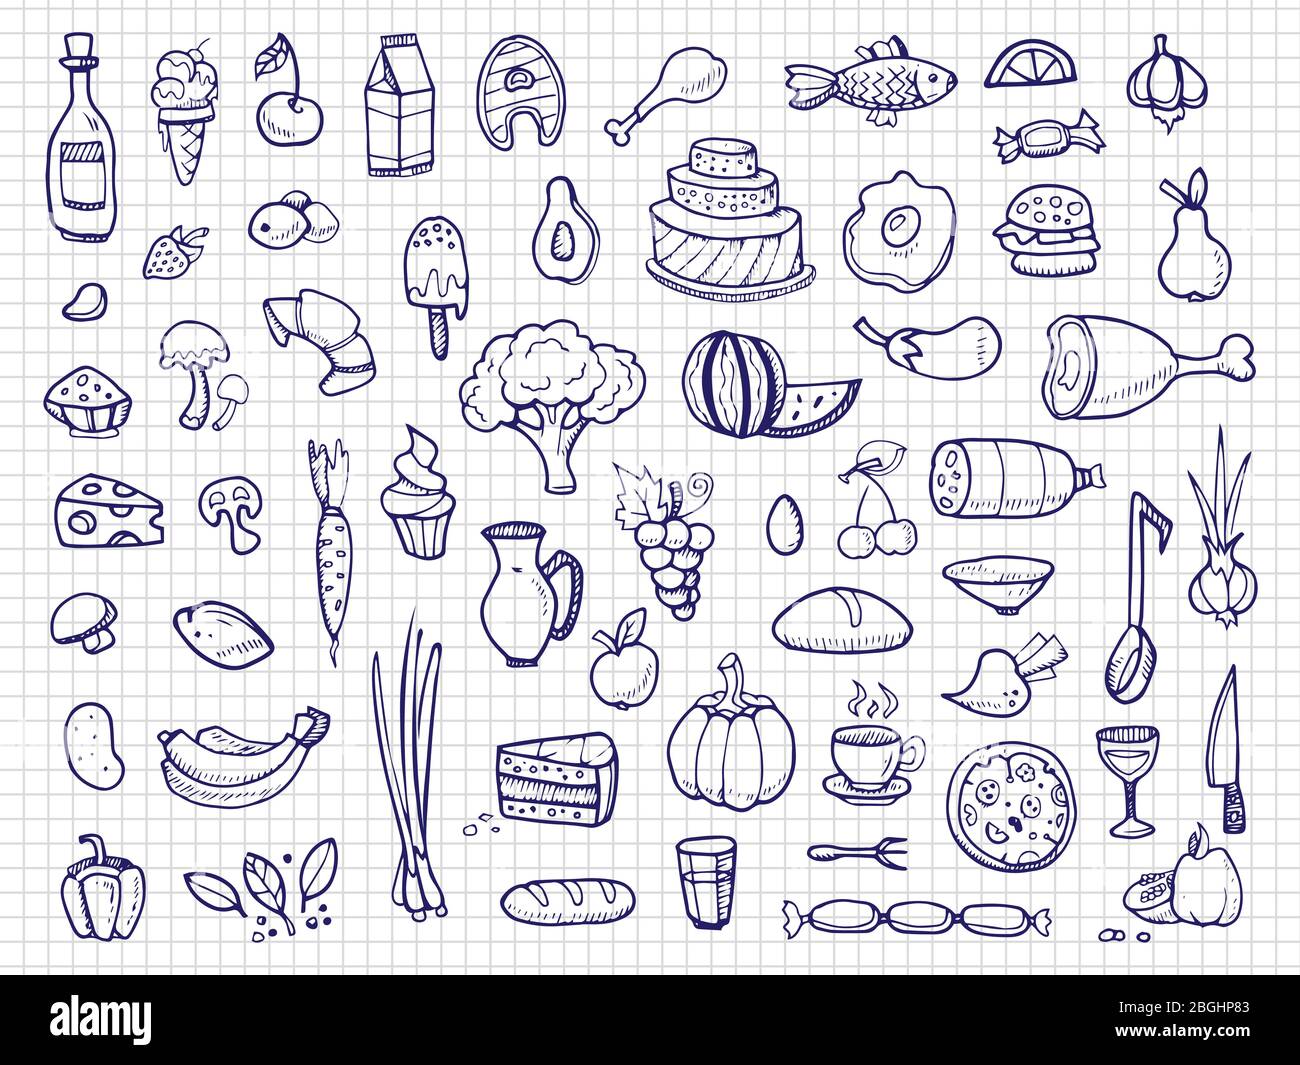 Hand drawn food, vegetables, drinks, snacks, fast food doodle vector icons. Illustration of delicious cheese and eggs, candy and pizza Stock Vector